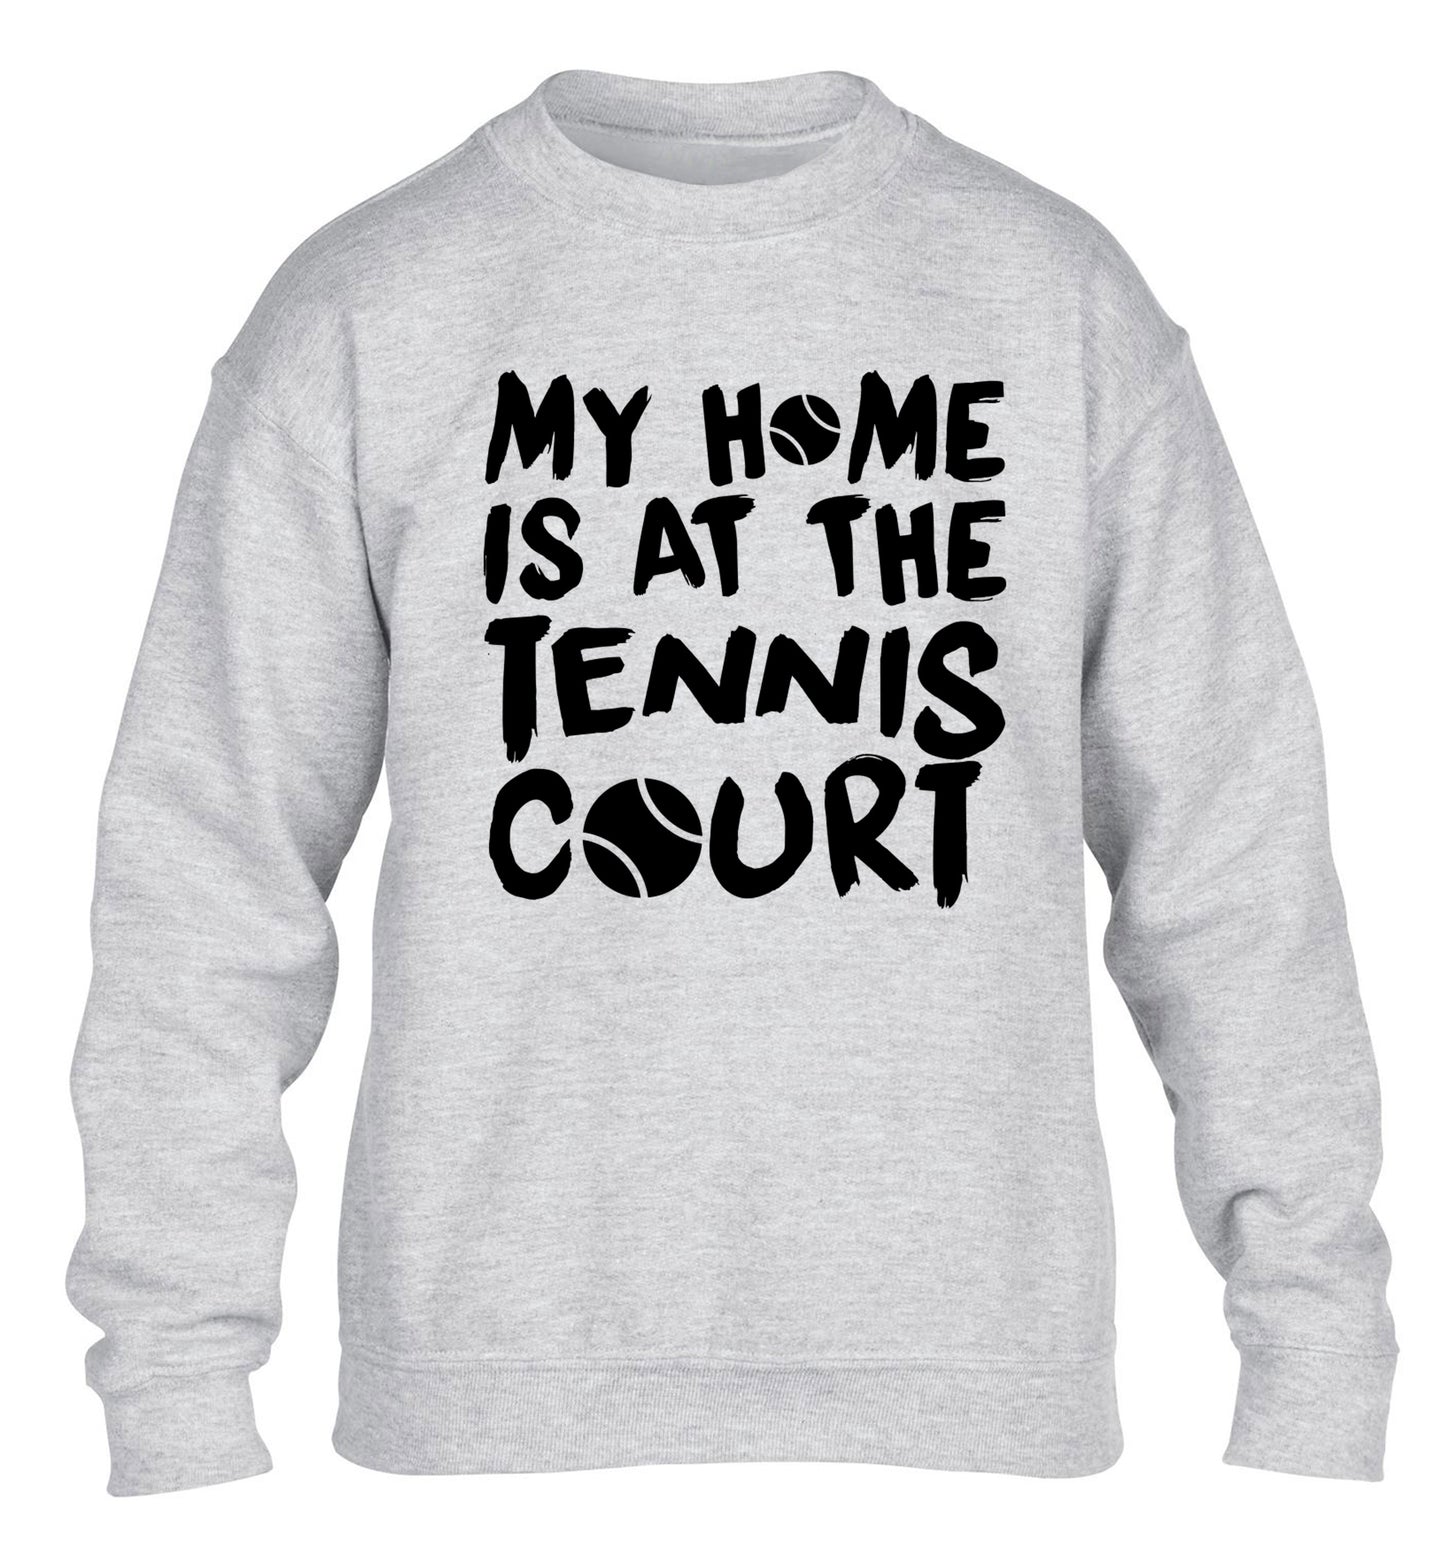 My home is at the tennis court children's grey sweater 12-14 Years